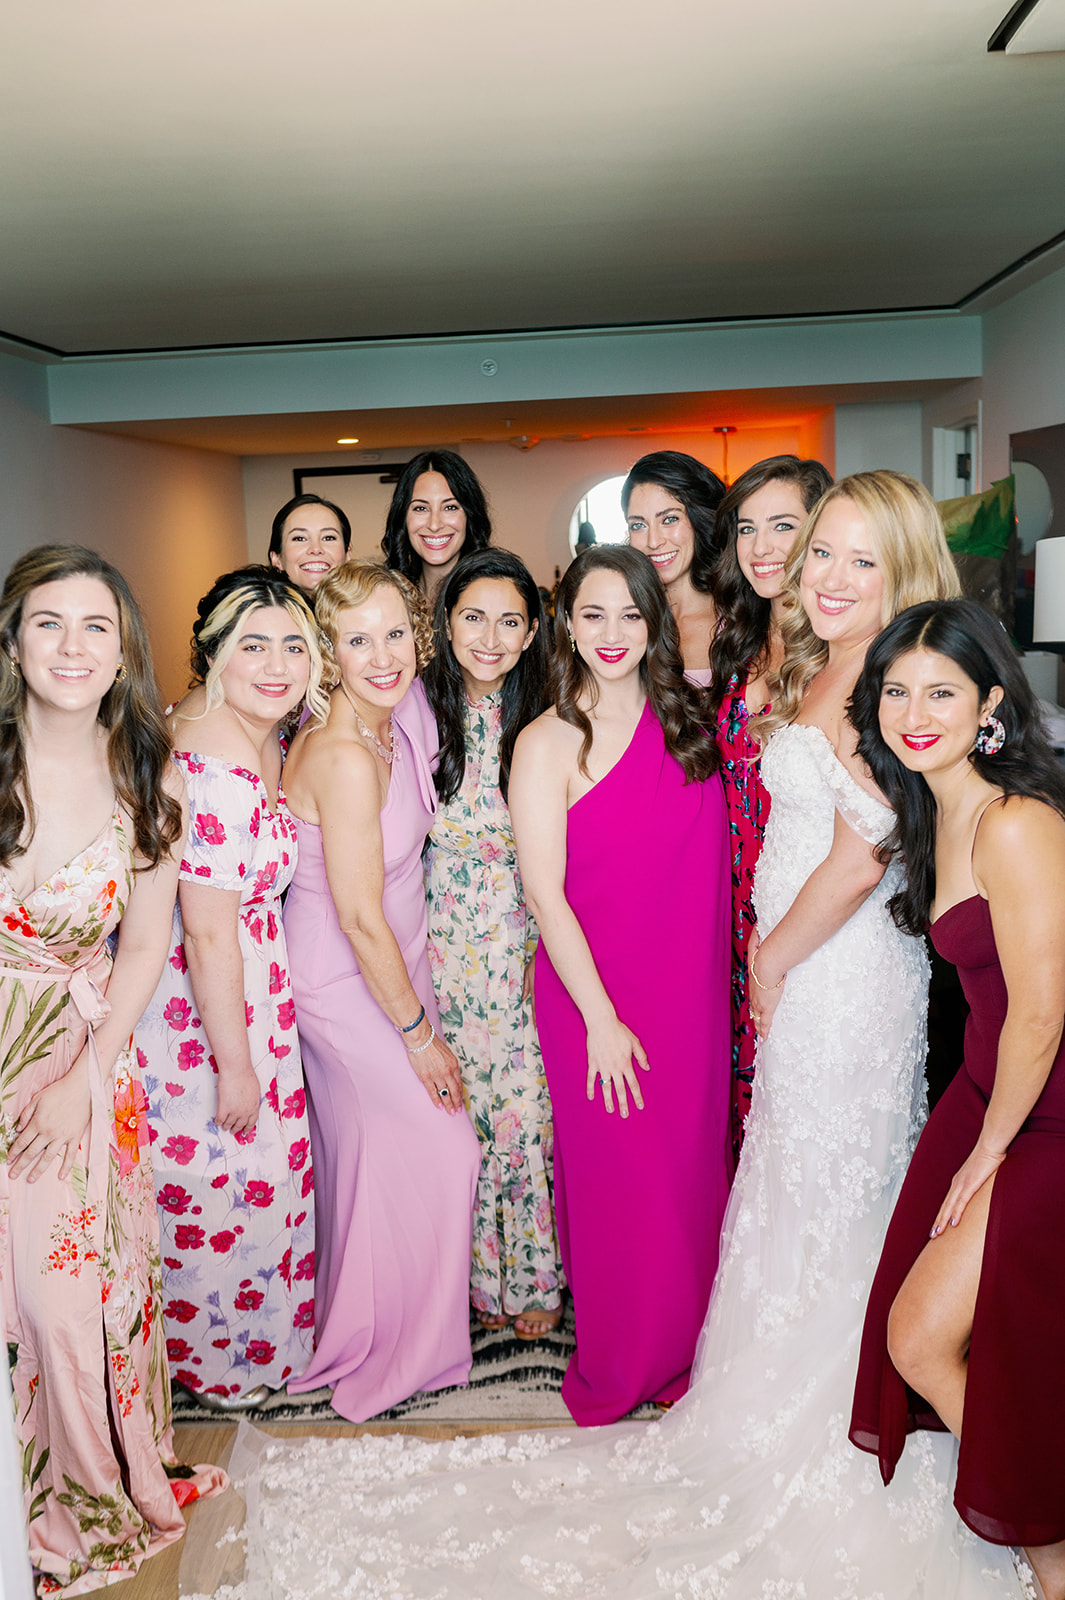 Bride and bridesmaids in mismatched pink dresses.